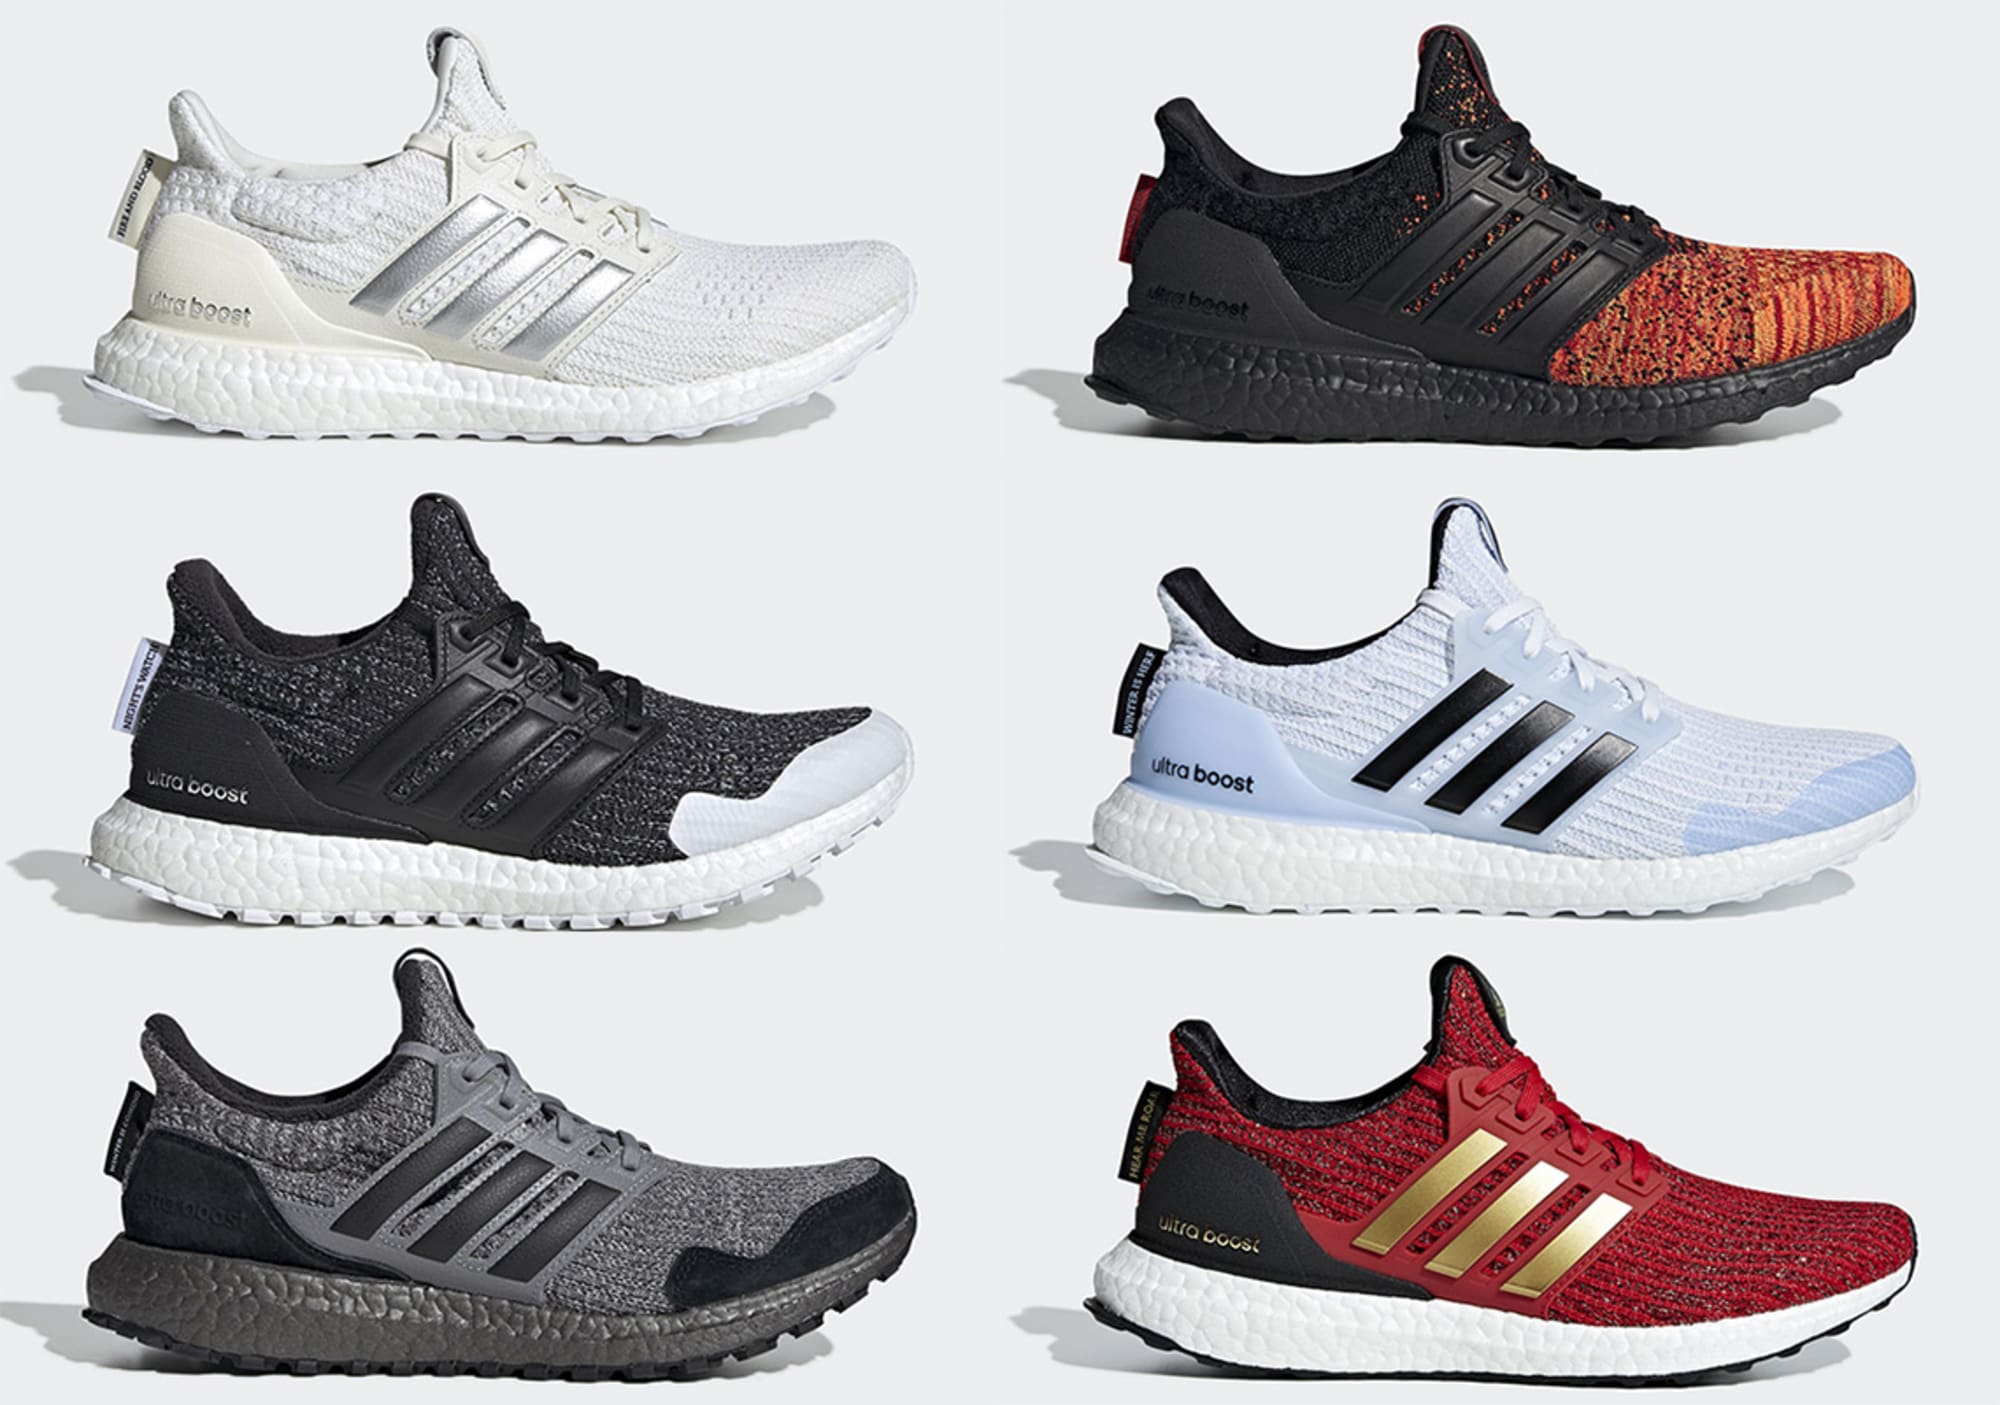 adidas game of thrones winter is coming